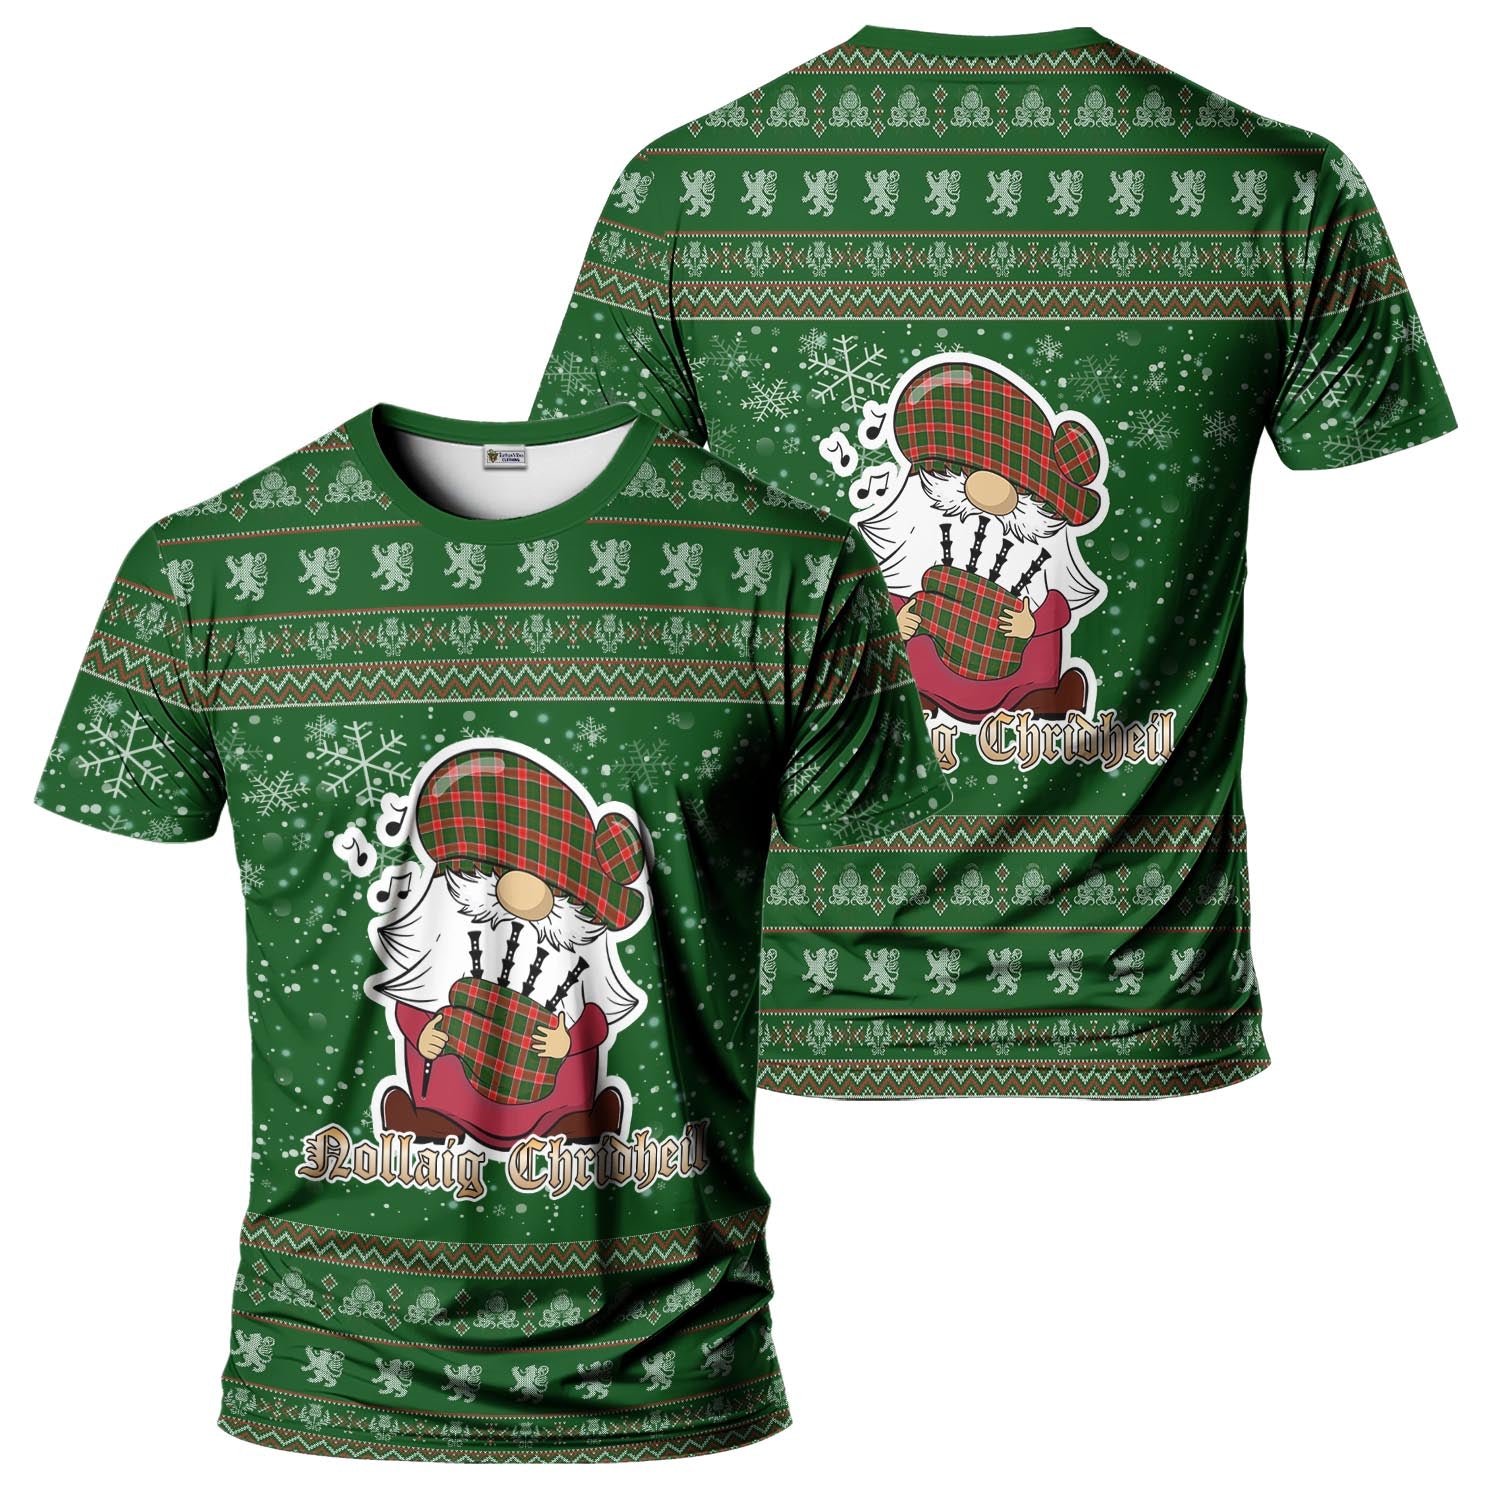 Pollock Modern Clan Christmas Family T-Shirt with Funny Gnome Playing Bagpipes Men's Shirt Green - Tartanvibesclothing